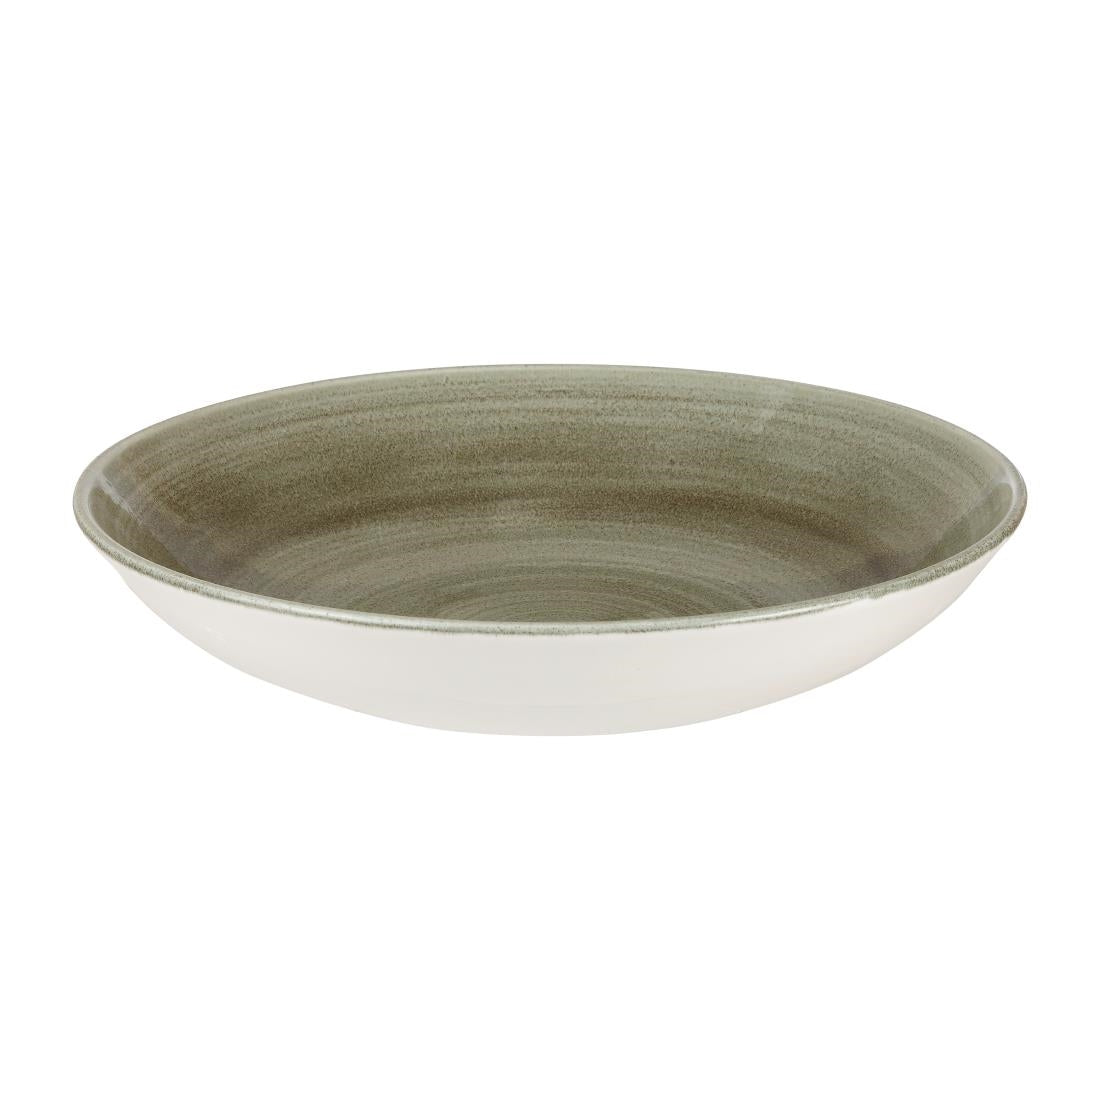 Churchill Stonecast Patina Antique Round Coupe Bowls Green 248mm (Pack of 12)